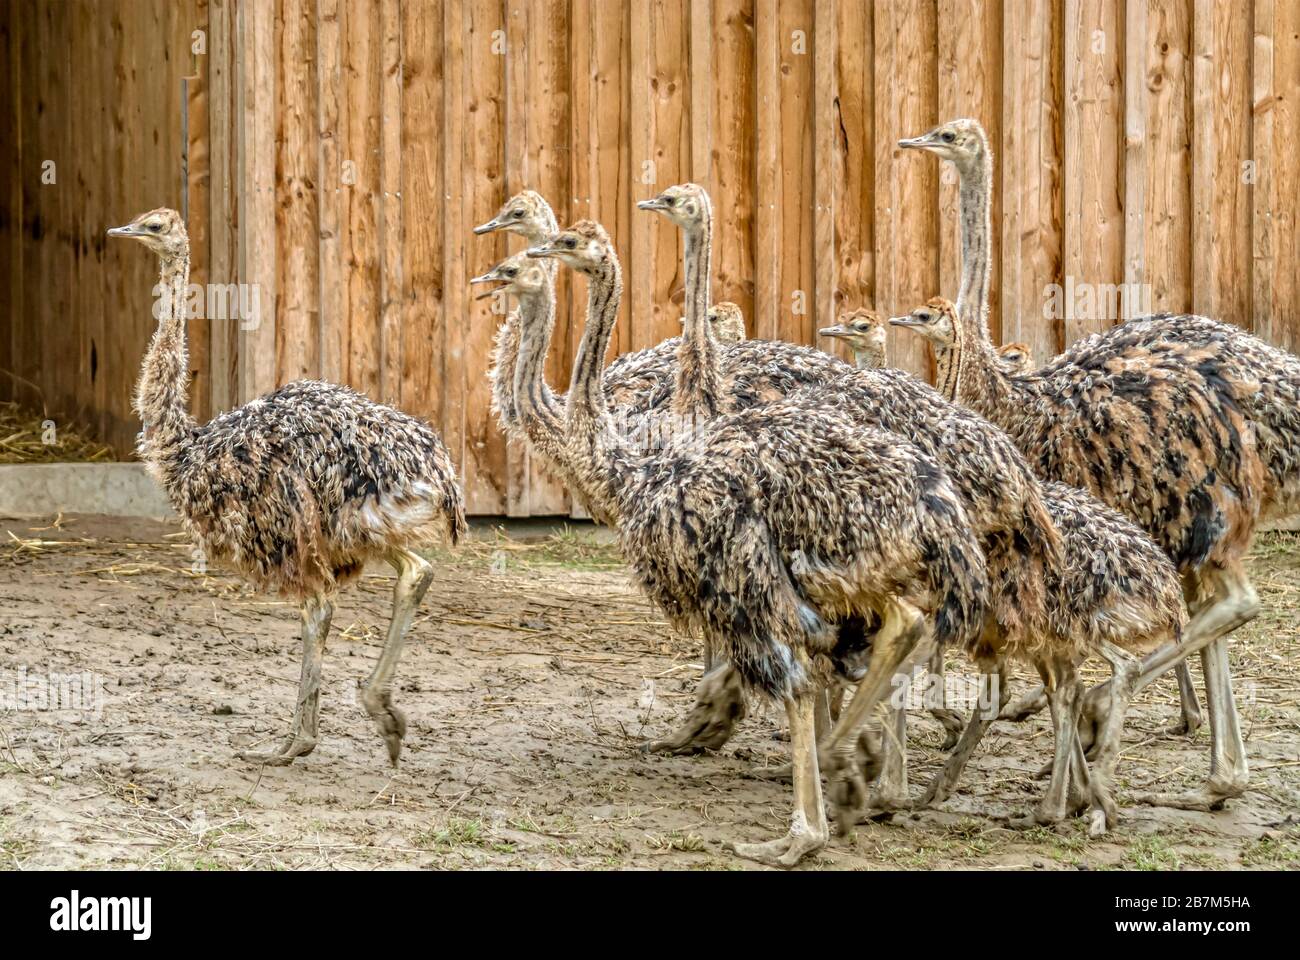 Group of adolescent Ostriches at the ostrich farm Striegistal in Saxony, Germany Stock Photo